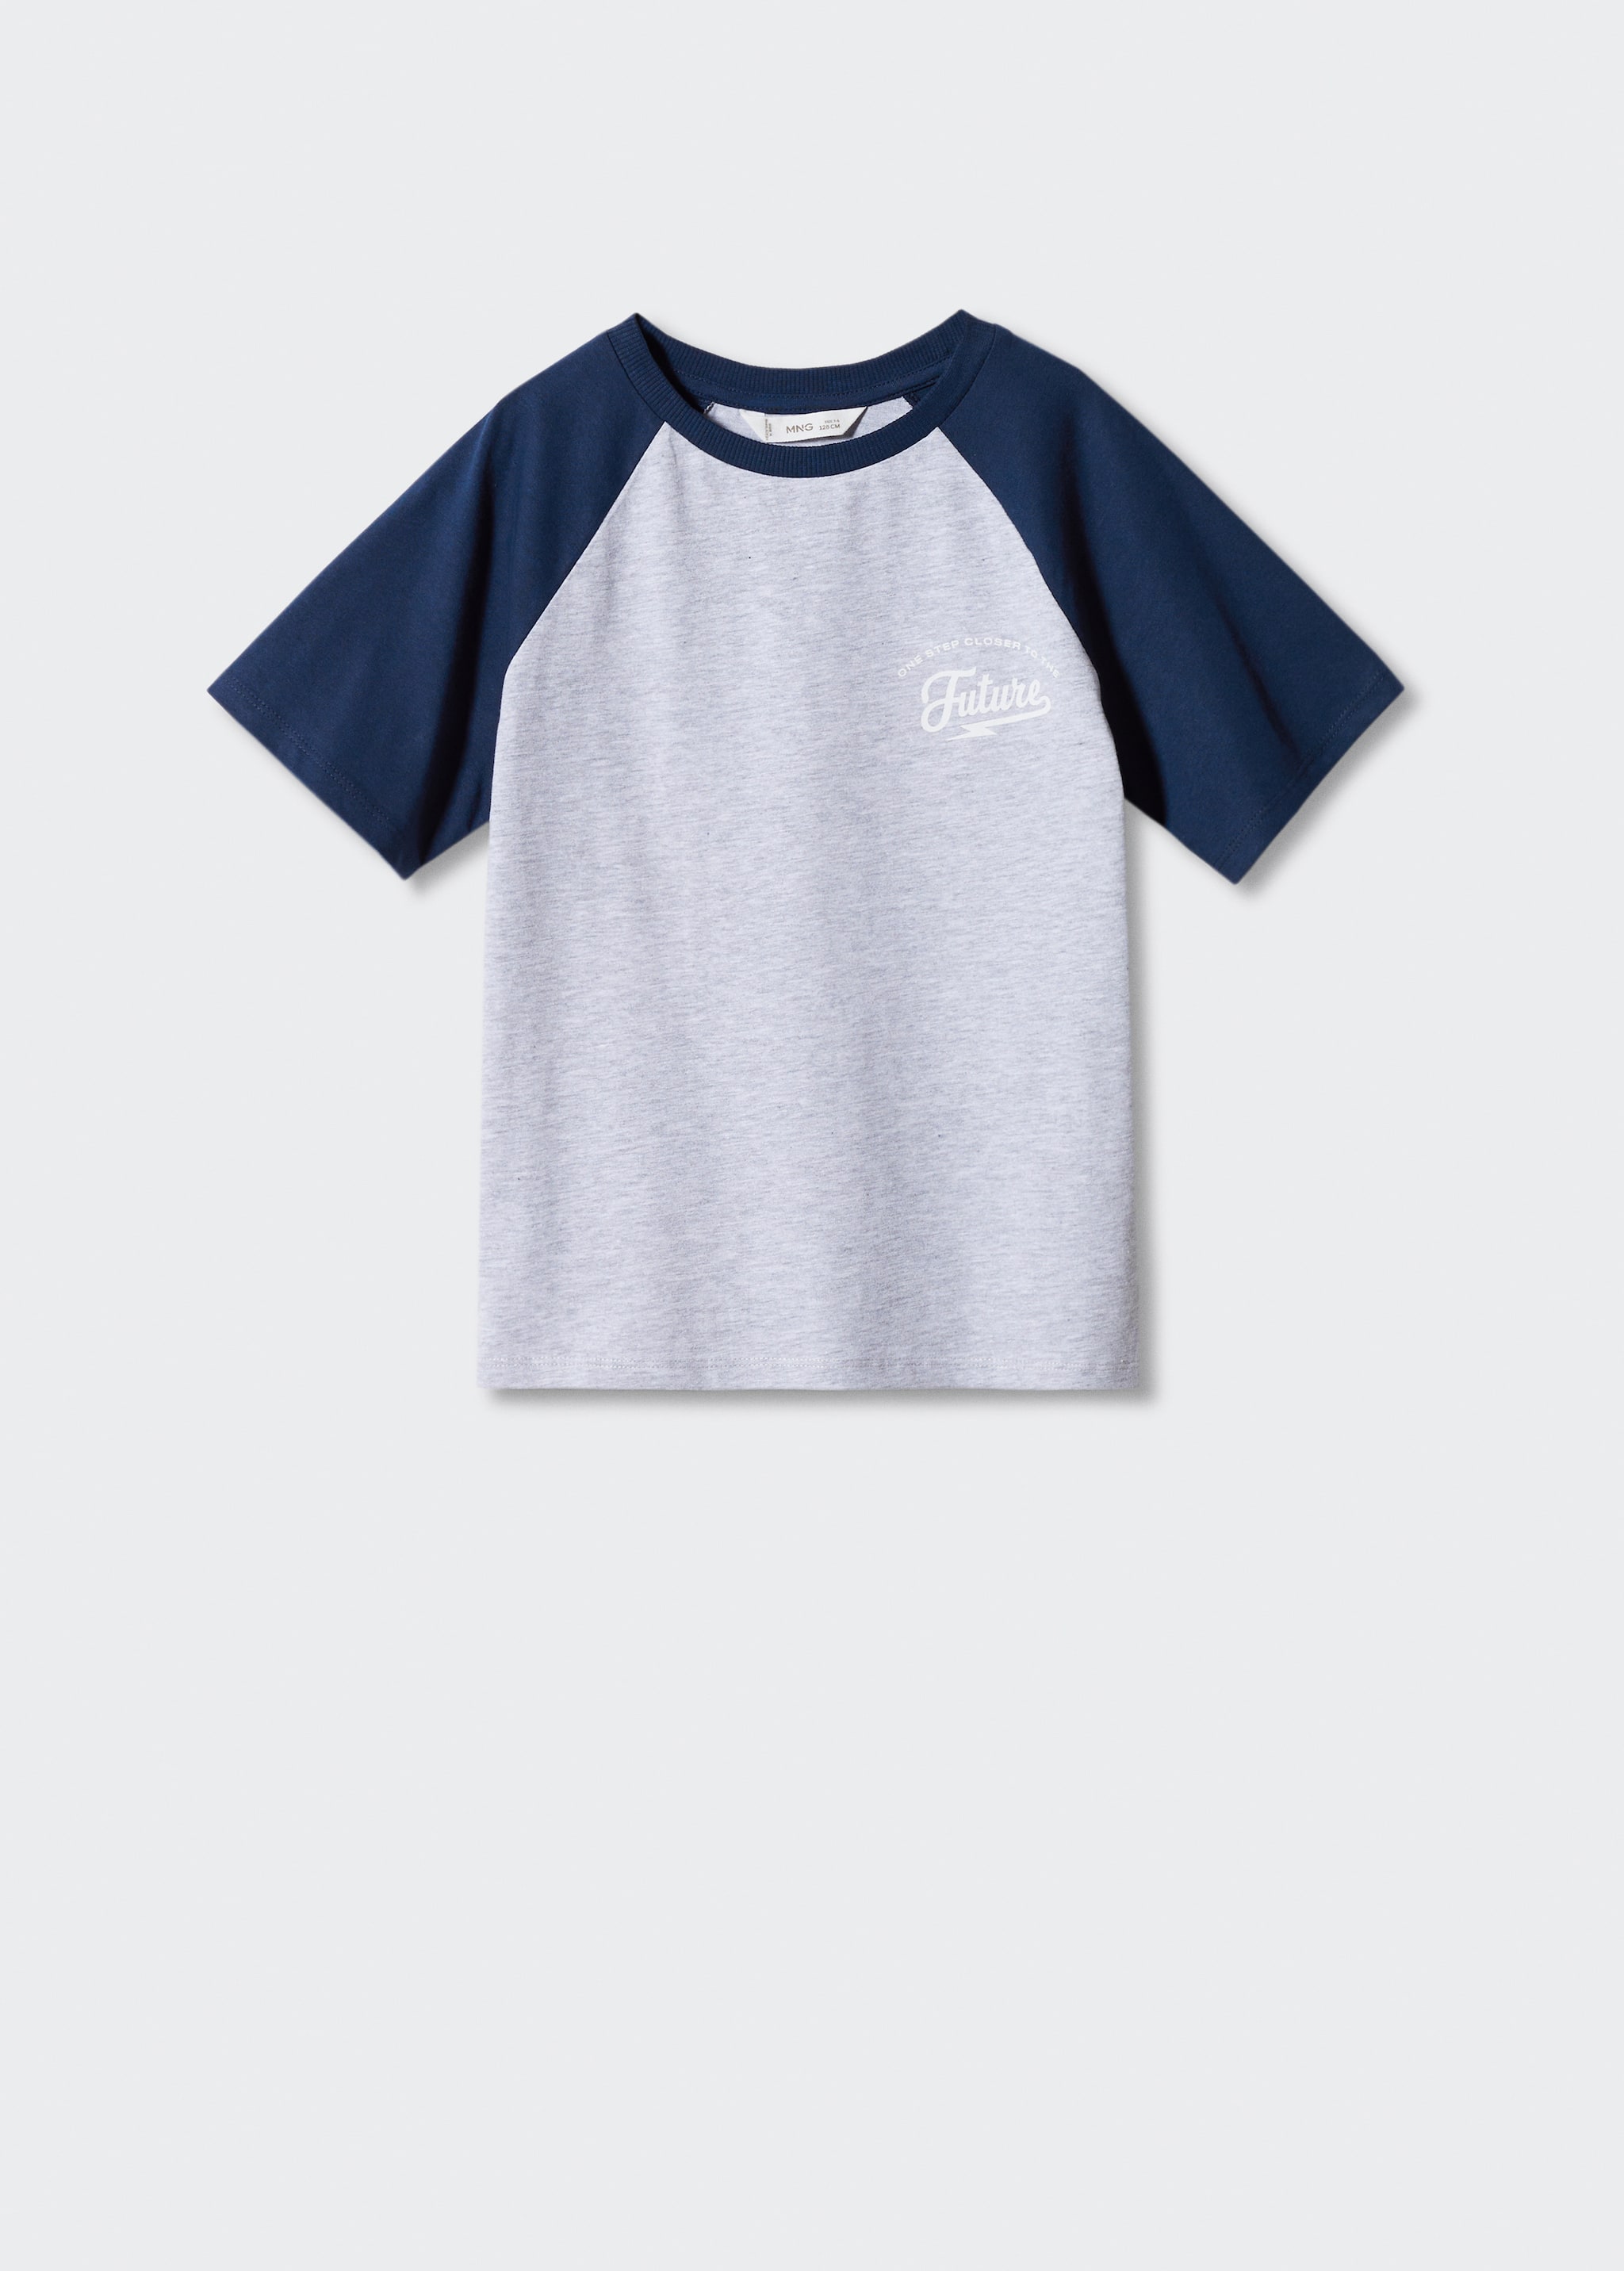 Raglan sleeve T-shirt - Article without model